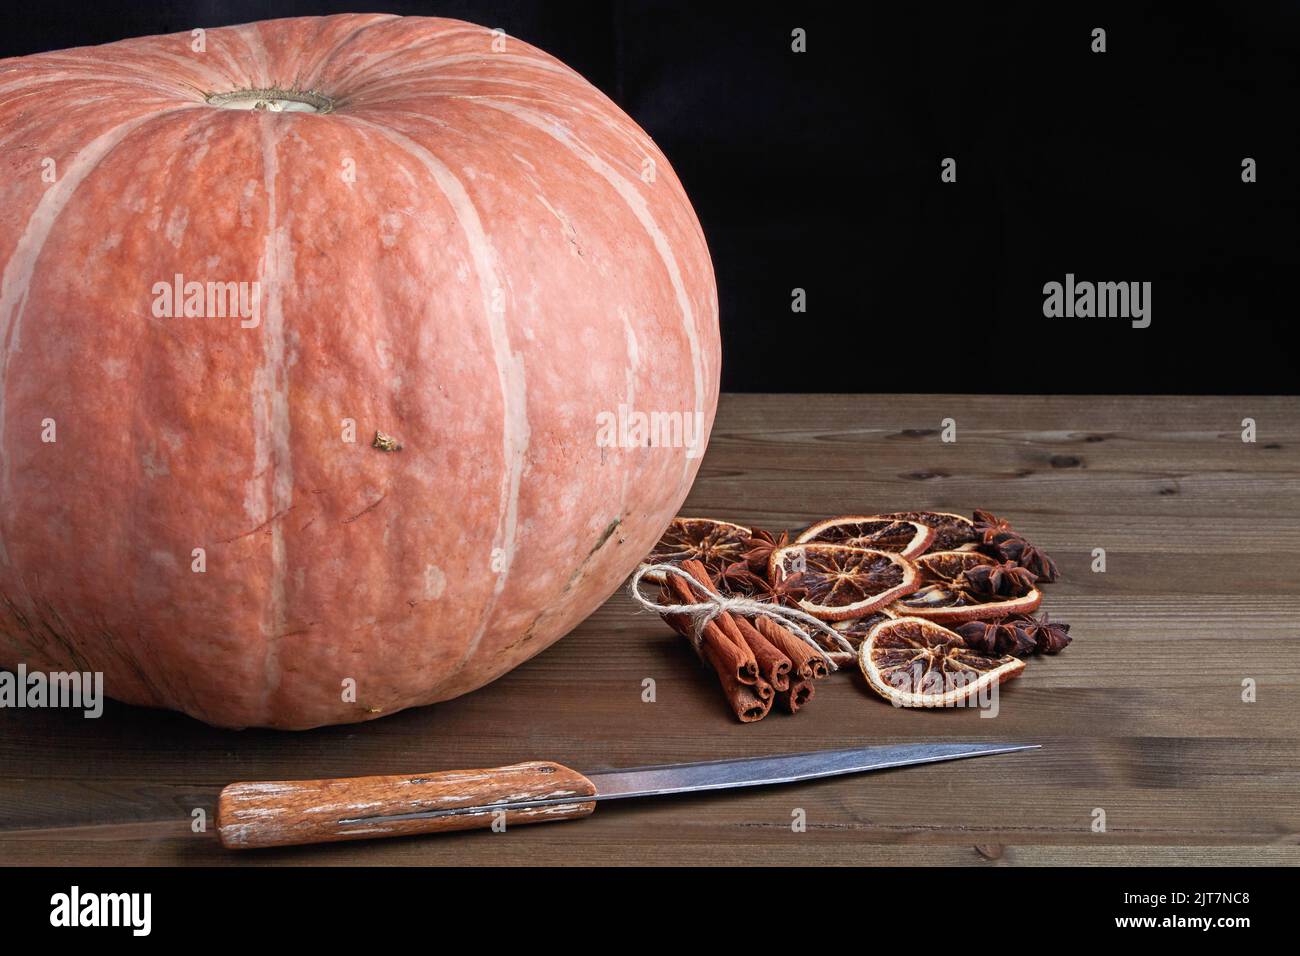 Beautiful big orange pumpkin and dried spices for making jam on a wooden table on a dark background Stock Photo